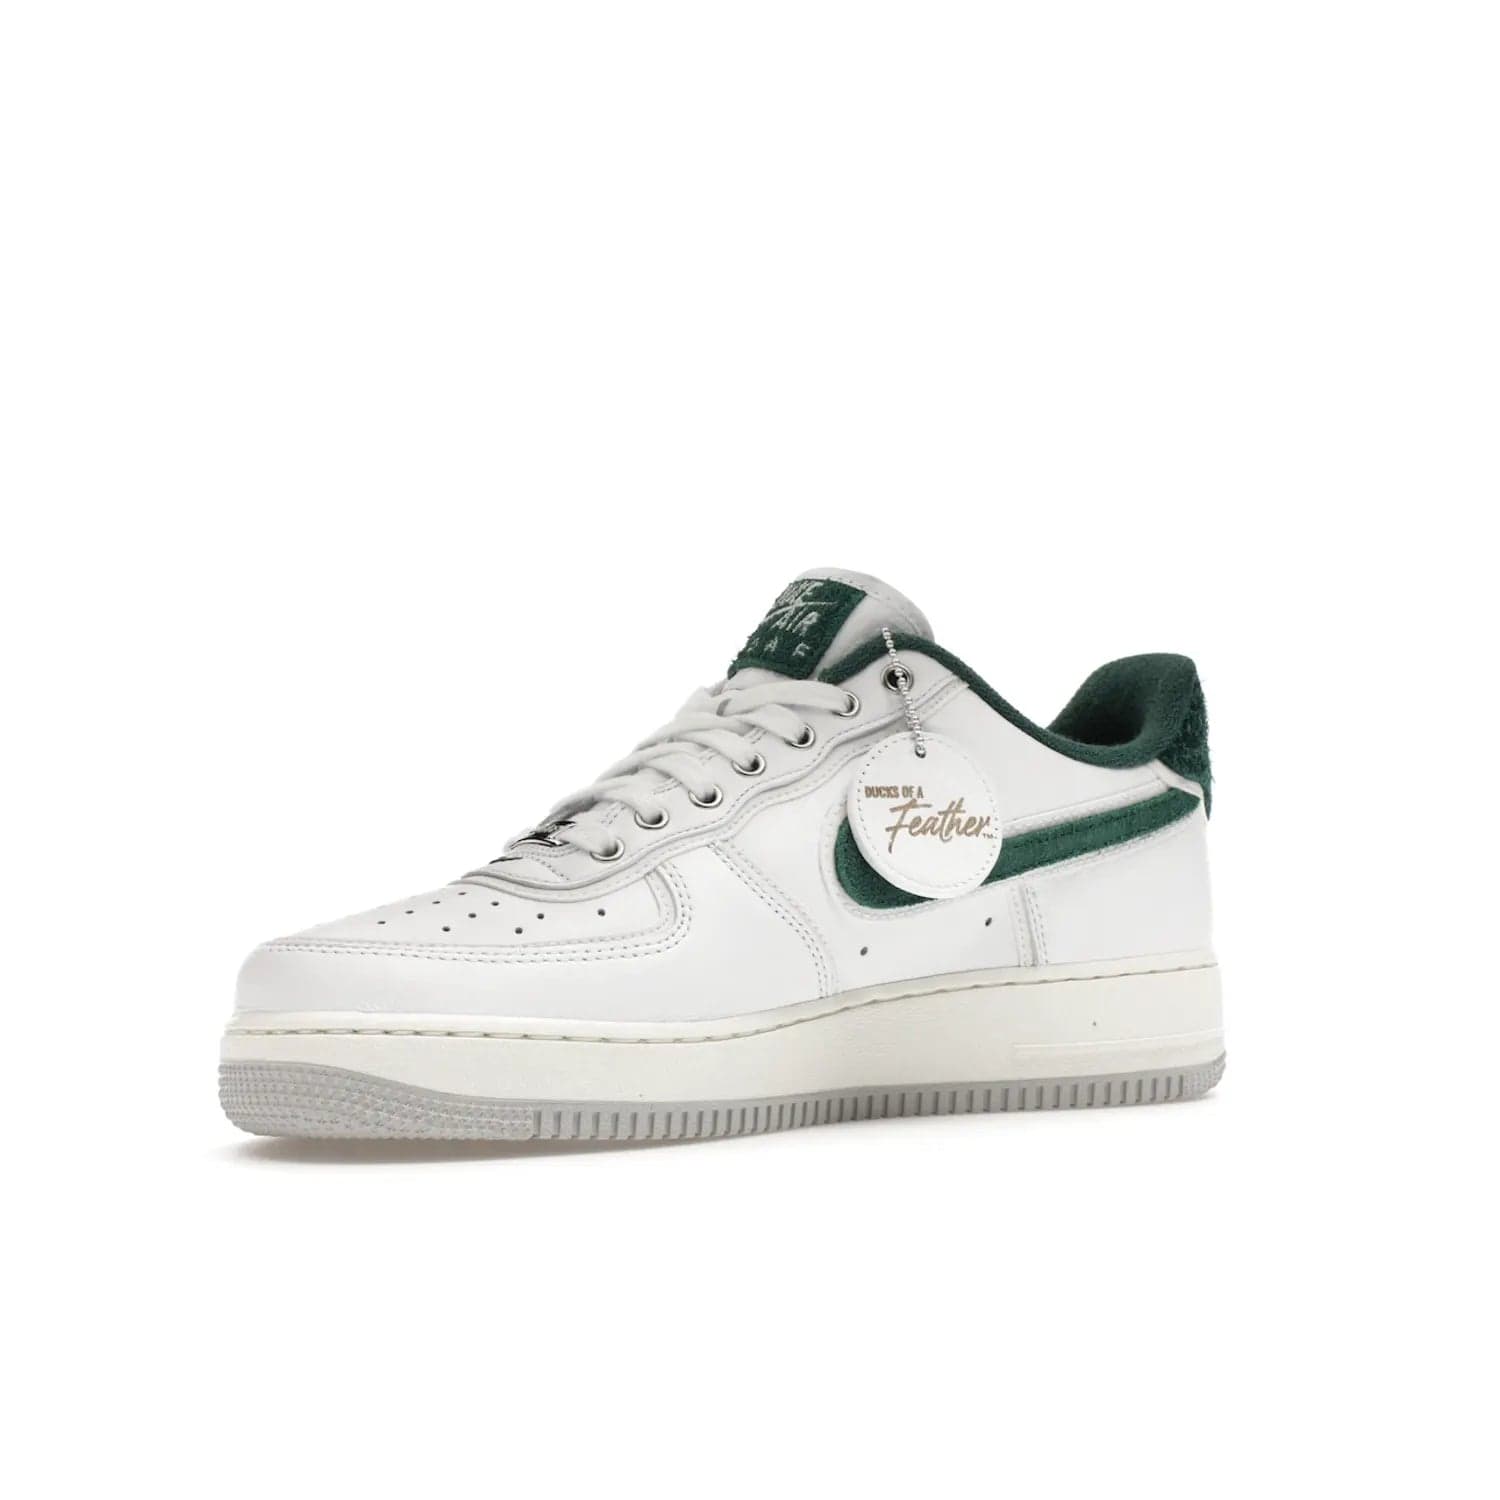 Nike Air Force 1 Low '07 Premium University of Oregon PE - Image 16 - Only at www.BallersClubKickz.com - The Nike Air Force 1 Low '07 Premium. Special Oregon University colorway. White base with green and sail accents. Cushioned rubber midsole. Comfort and style. Support your school!